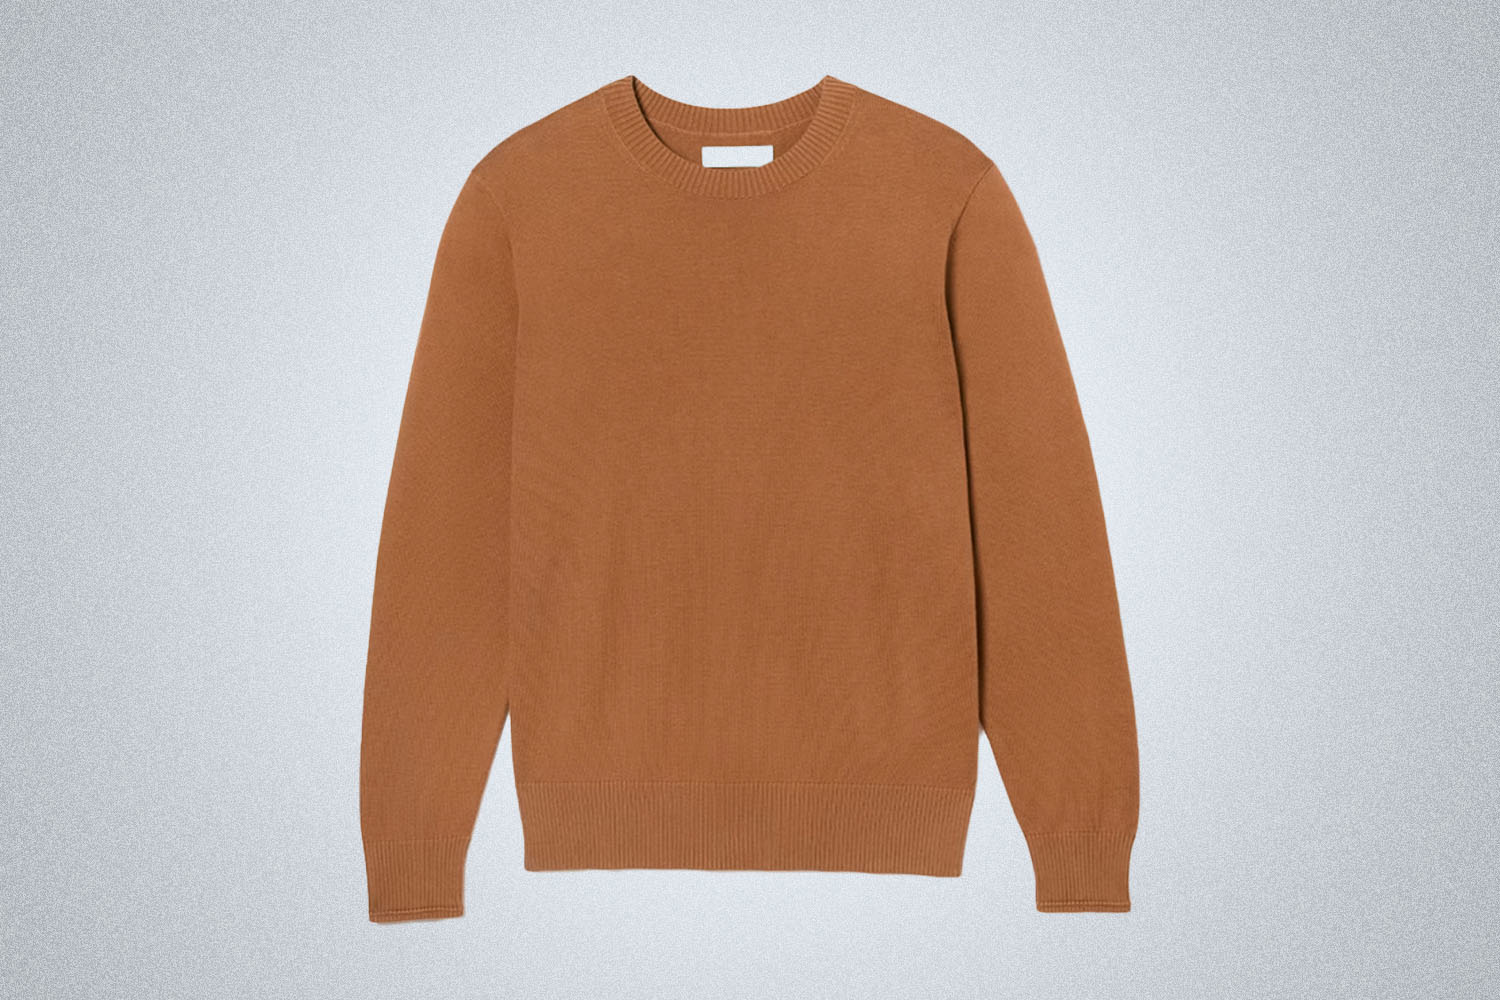 a burnt orange sweater from Everlane on a grey background